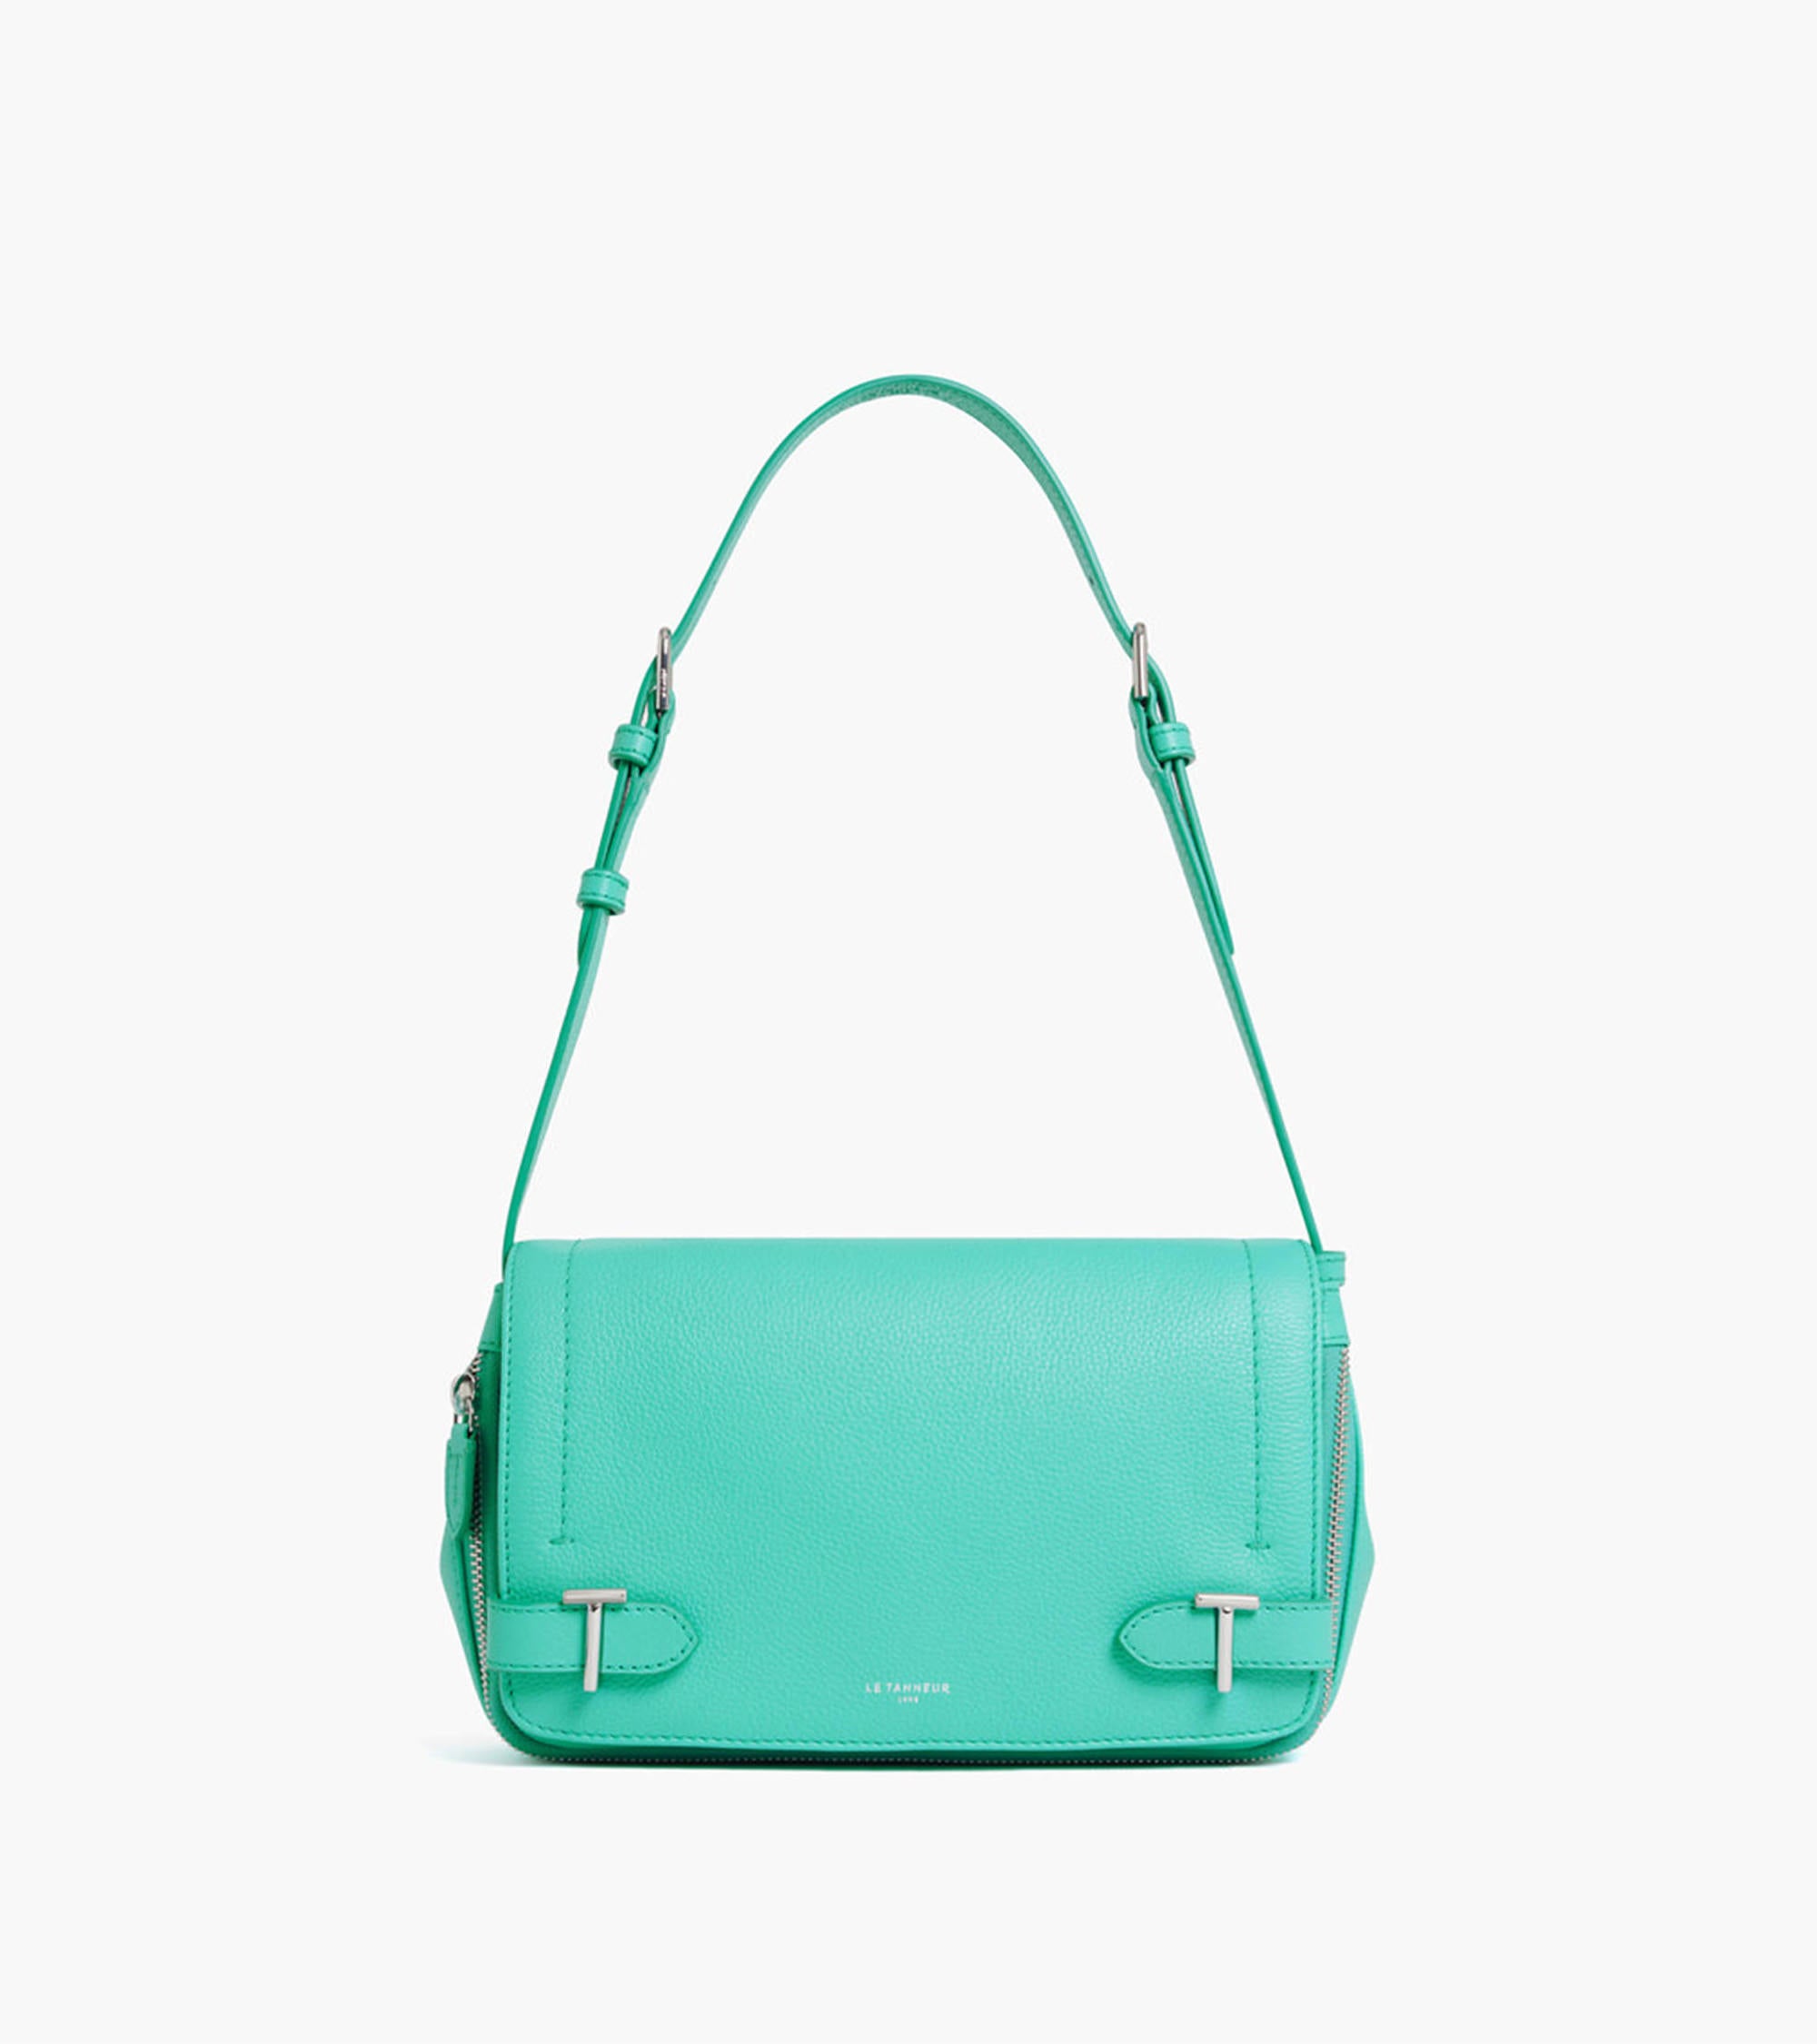 Simone small bag with crossbody strap in pebbled leather